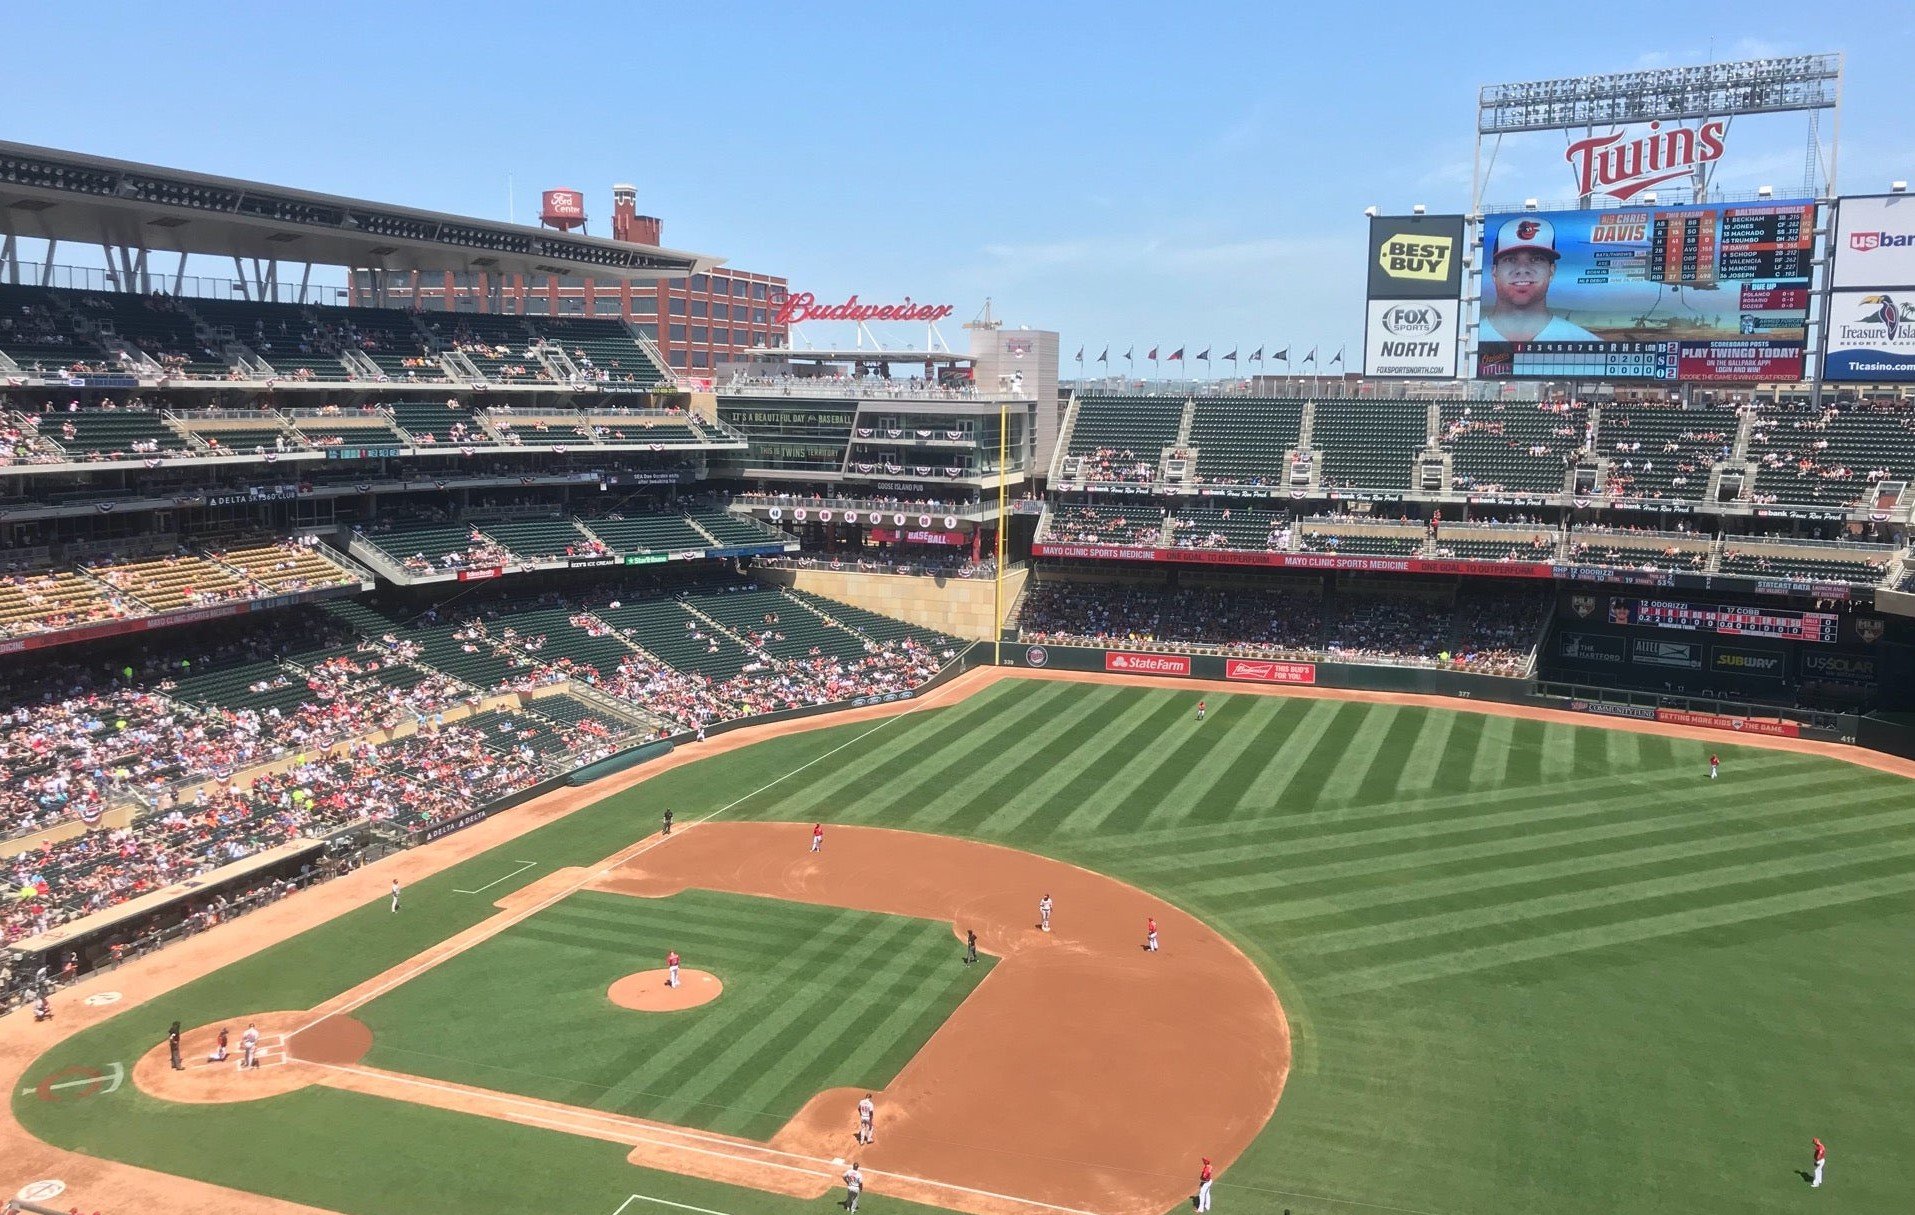 Target Field Seating for Twins Games - RateYourSeats.com